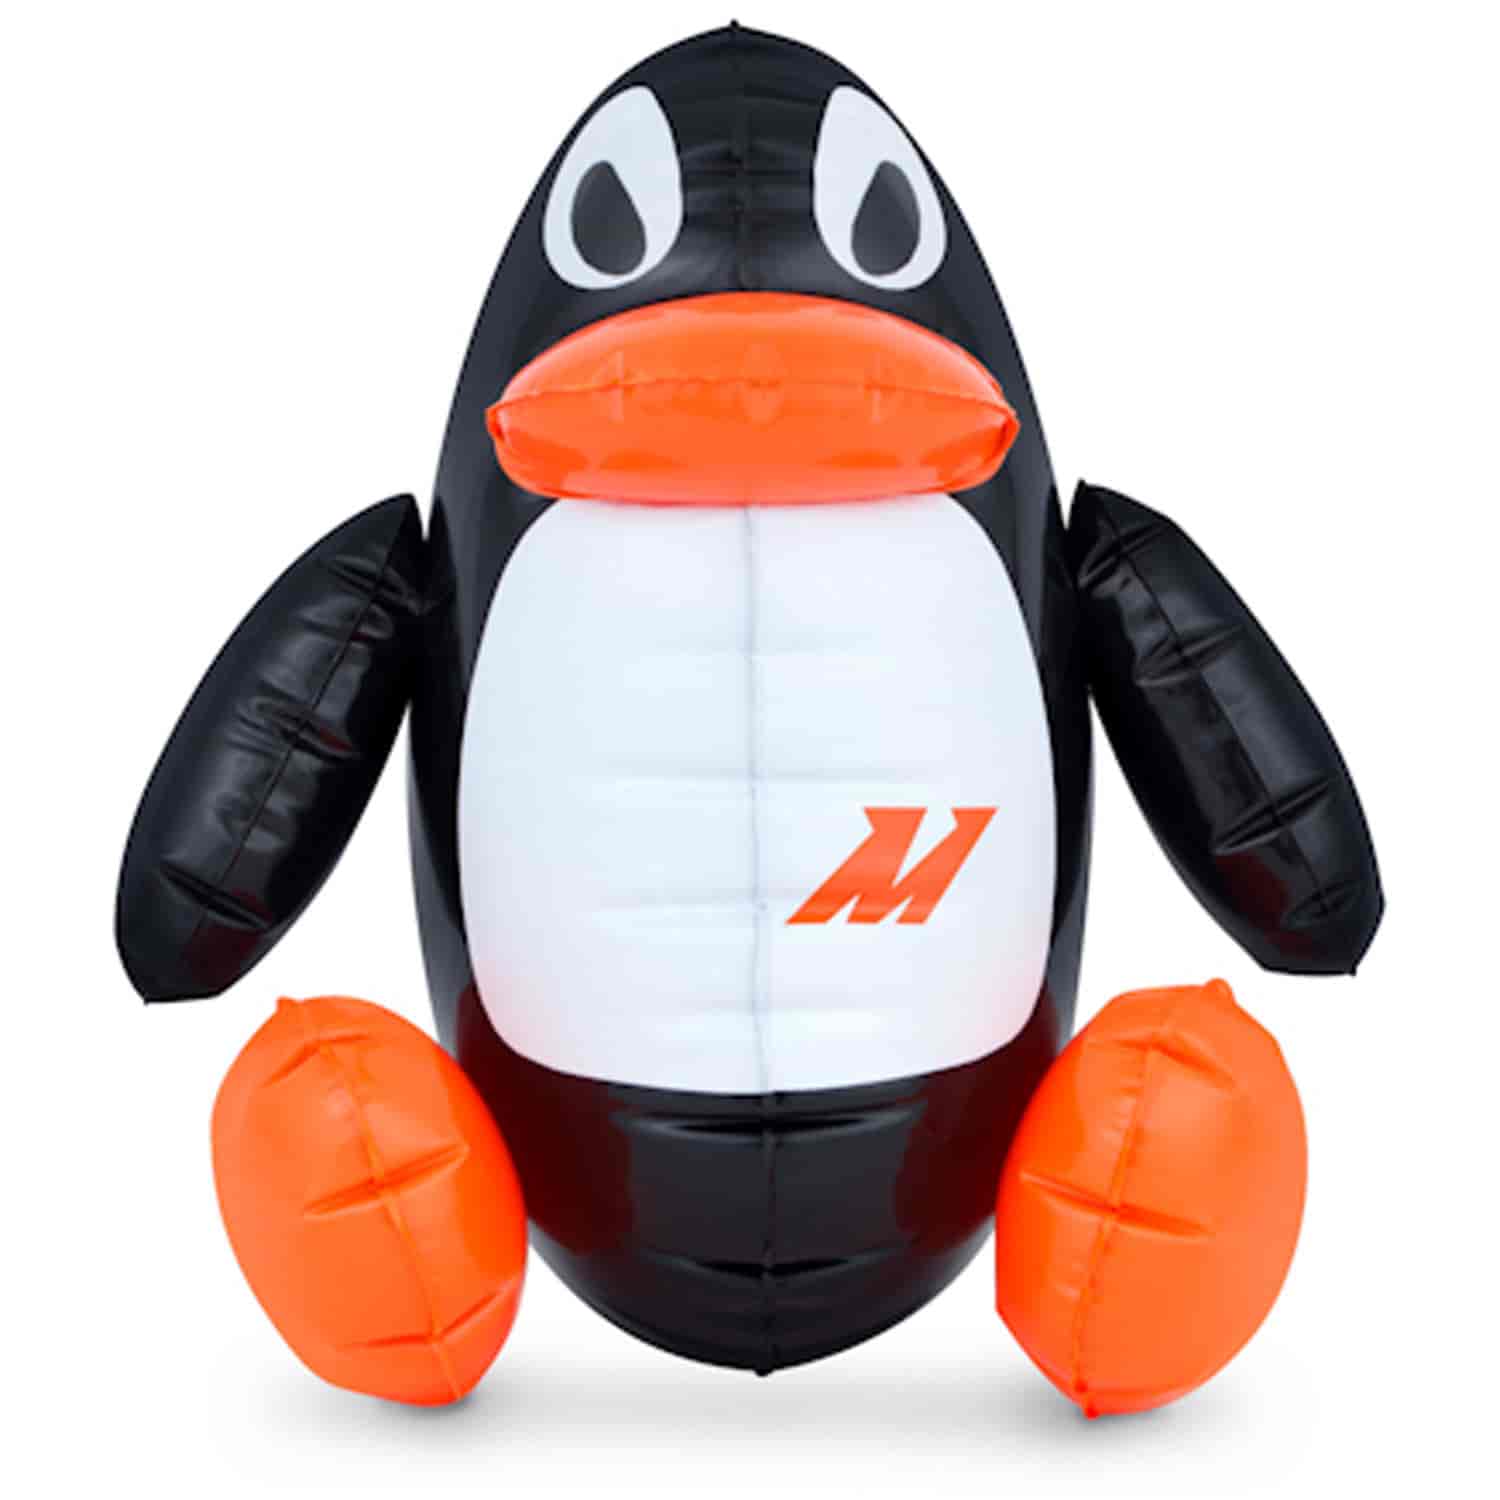 Chilly the Penguin Inflatable Toy - MFG Part No. MMPROMO-TOY-PENG